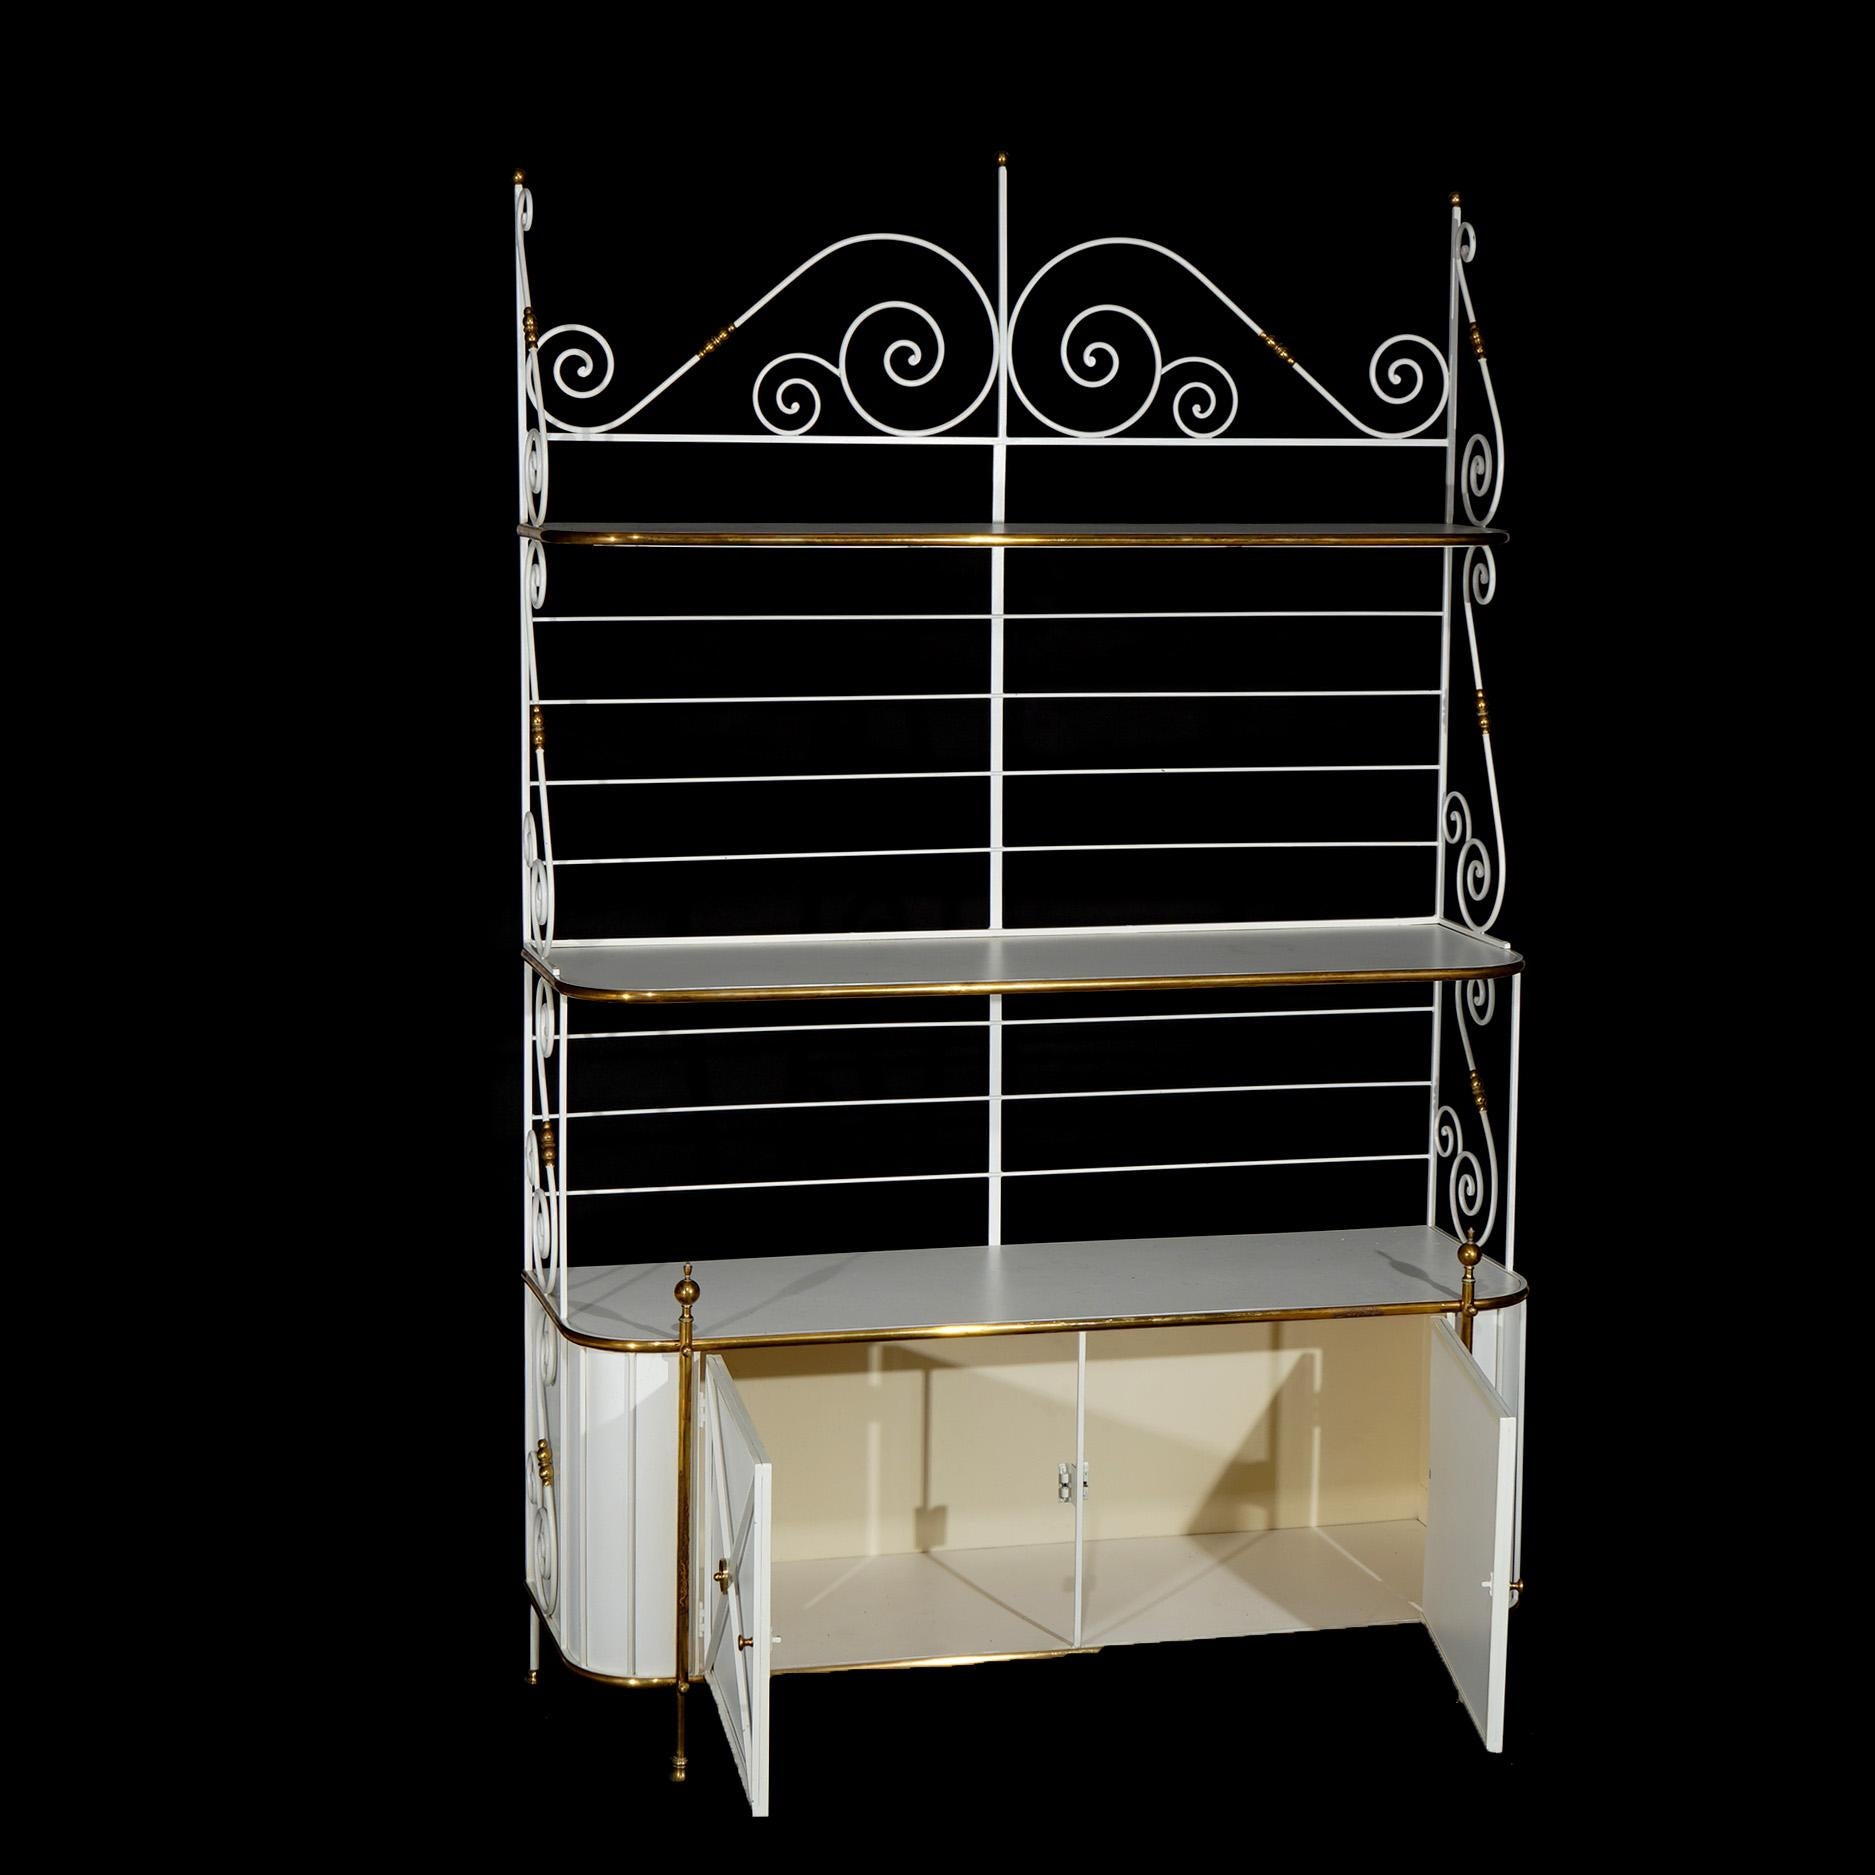 Hollywood Regency Wood & Scrolled Brass Bakers Rack with Shelved Upper and Lower with Cabinets, 20thC

Measures- 94''H x 60.25''W x 21.75''D